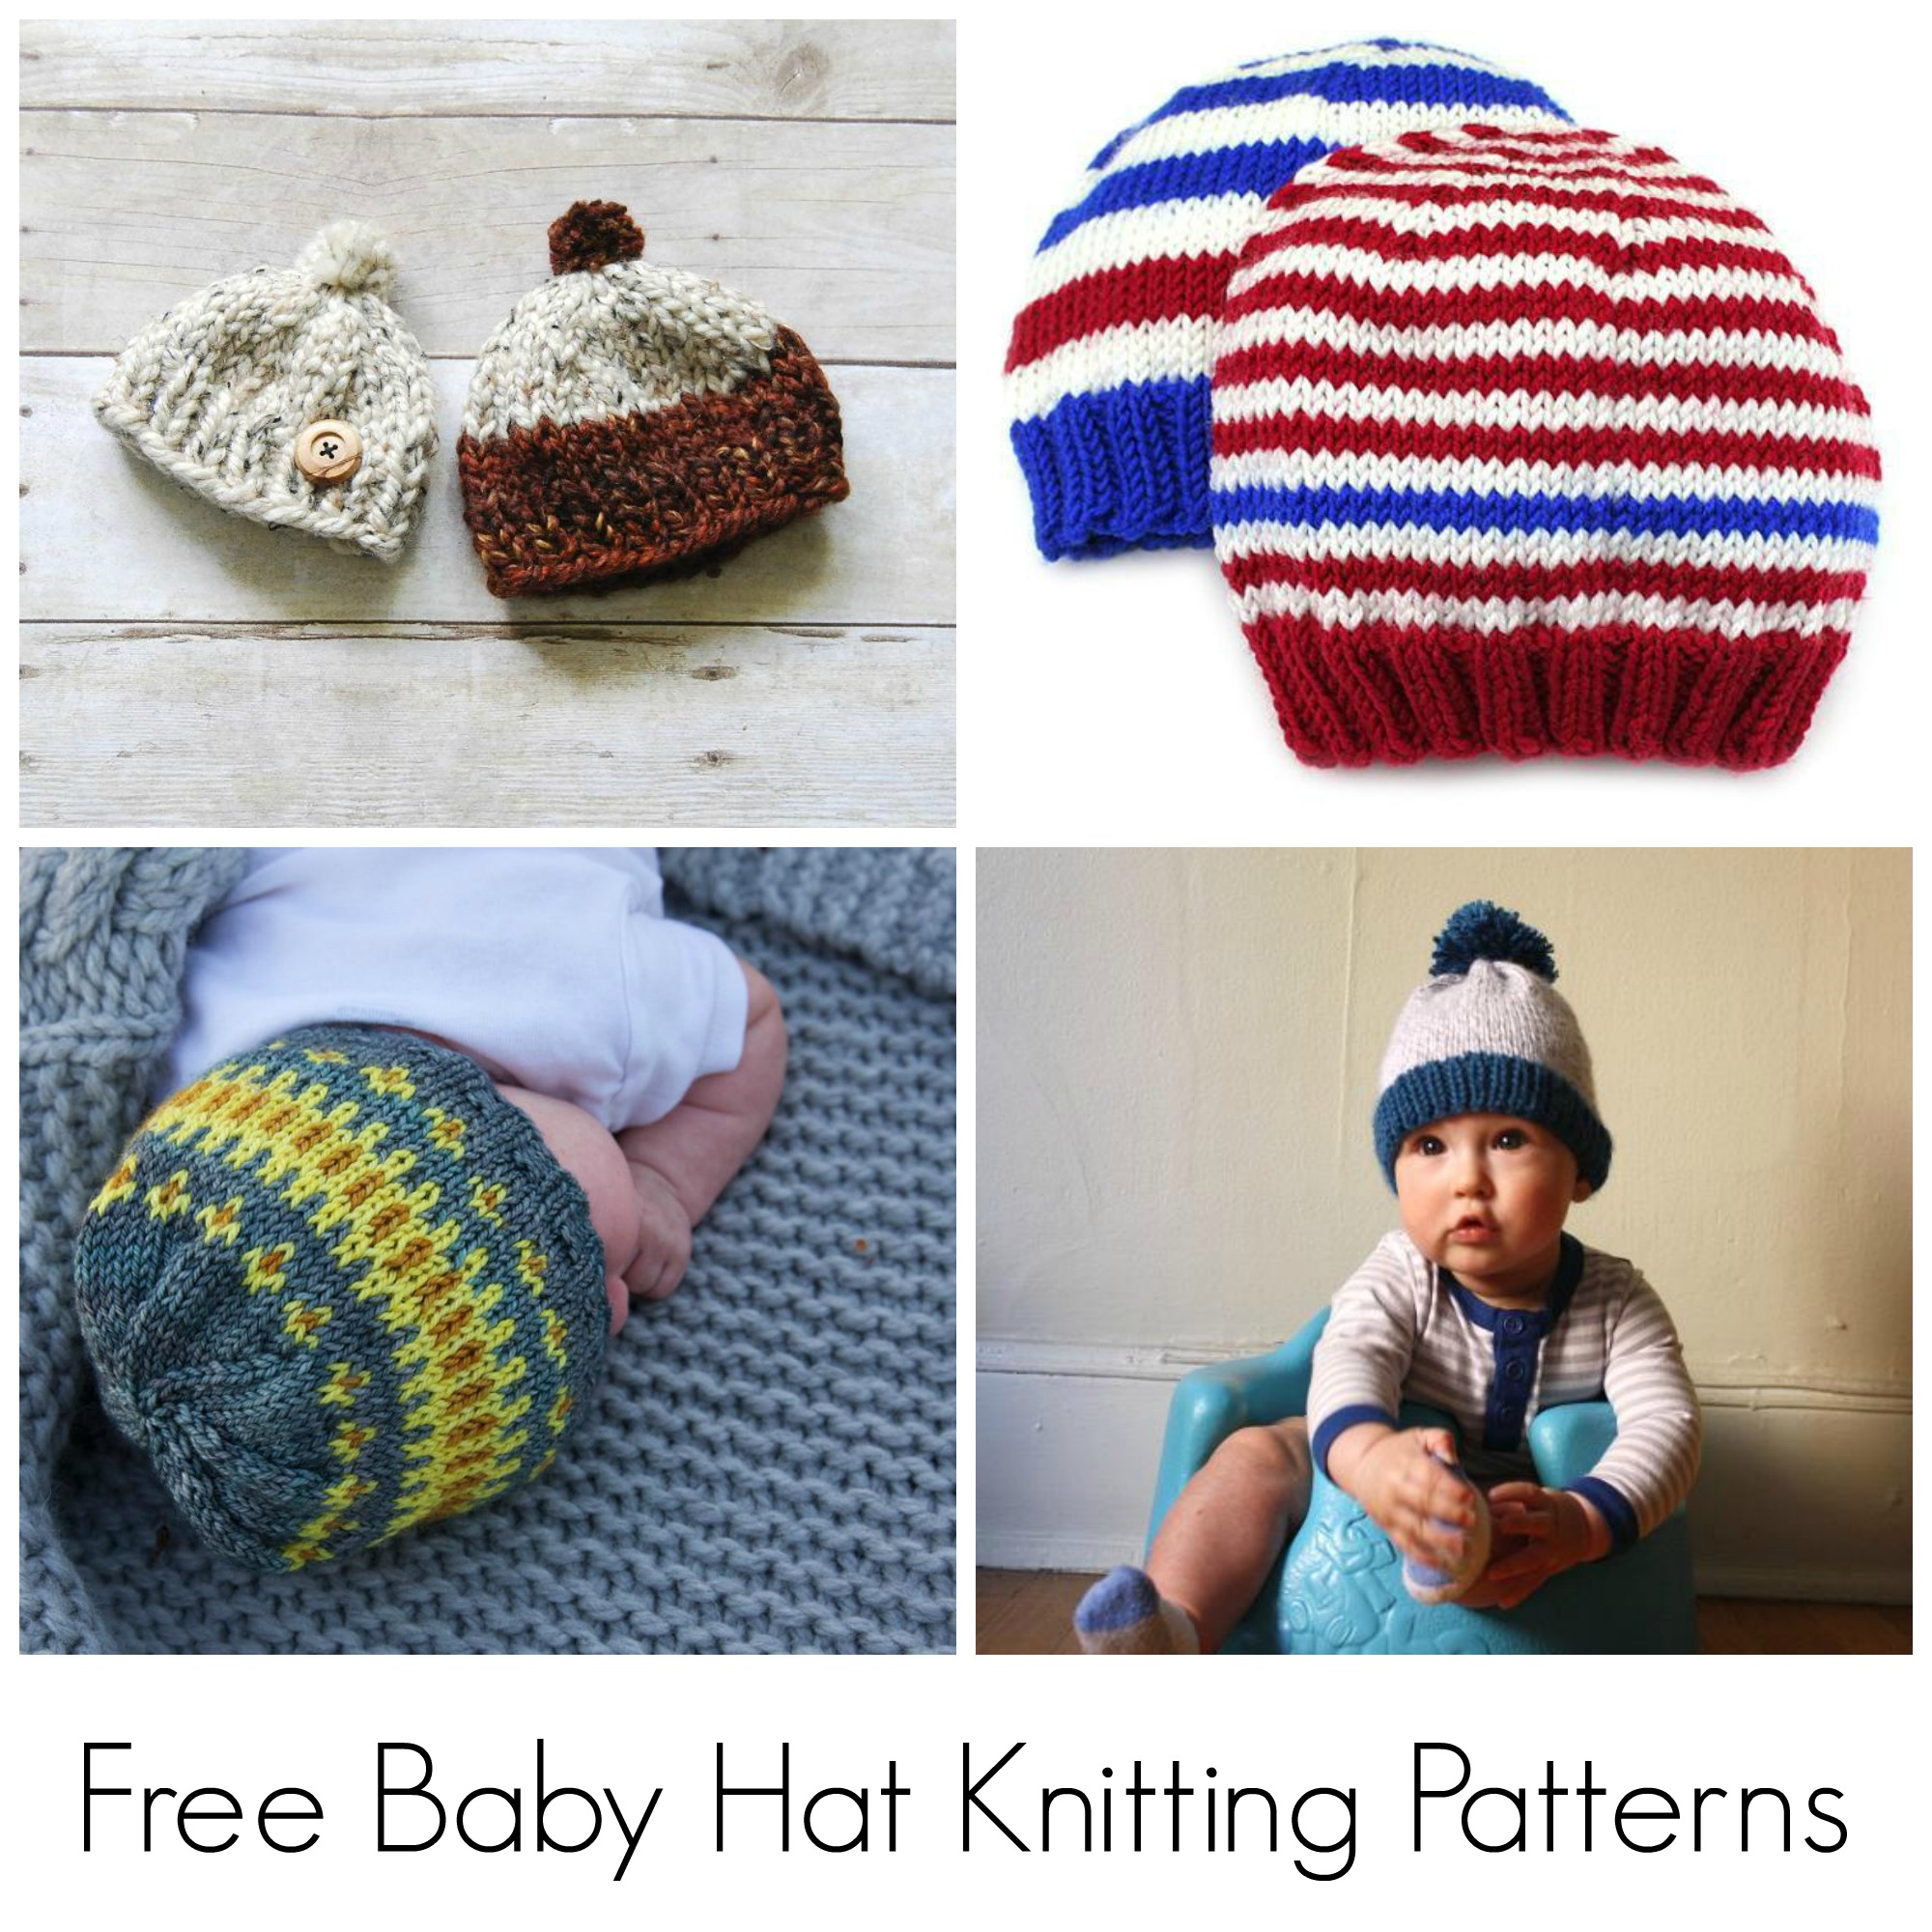 8 Ply Wool Knitting Patterns 10 Free Knitting Patterns For Ba Hats On Craftsy